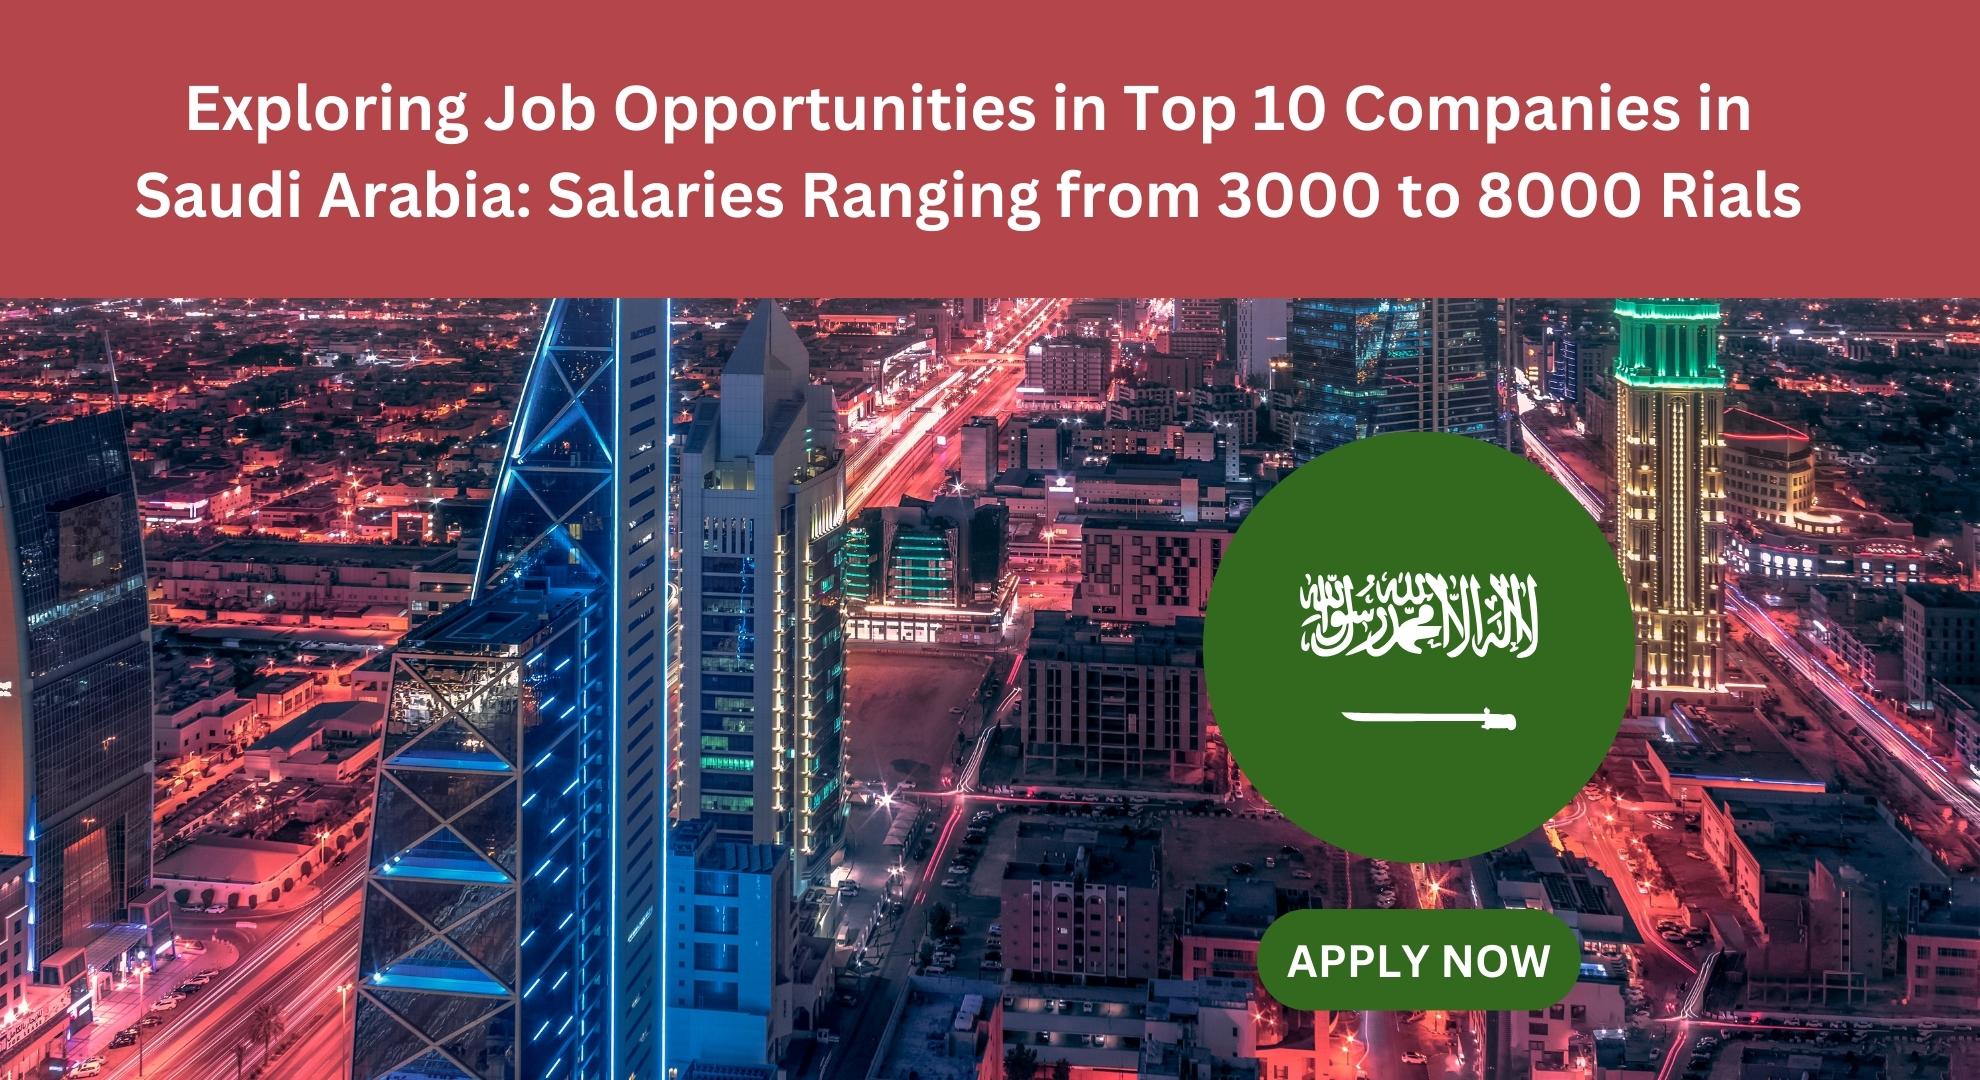 Jobs in 10 big companies of Saudi Arabia with salary from 3000 Rials to 8000 Rials